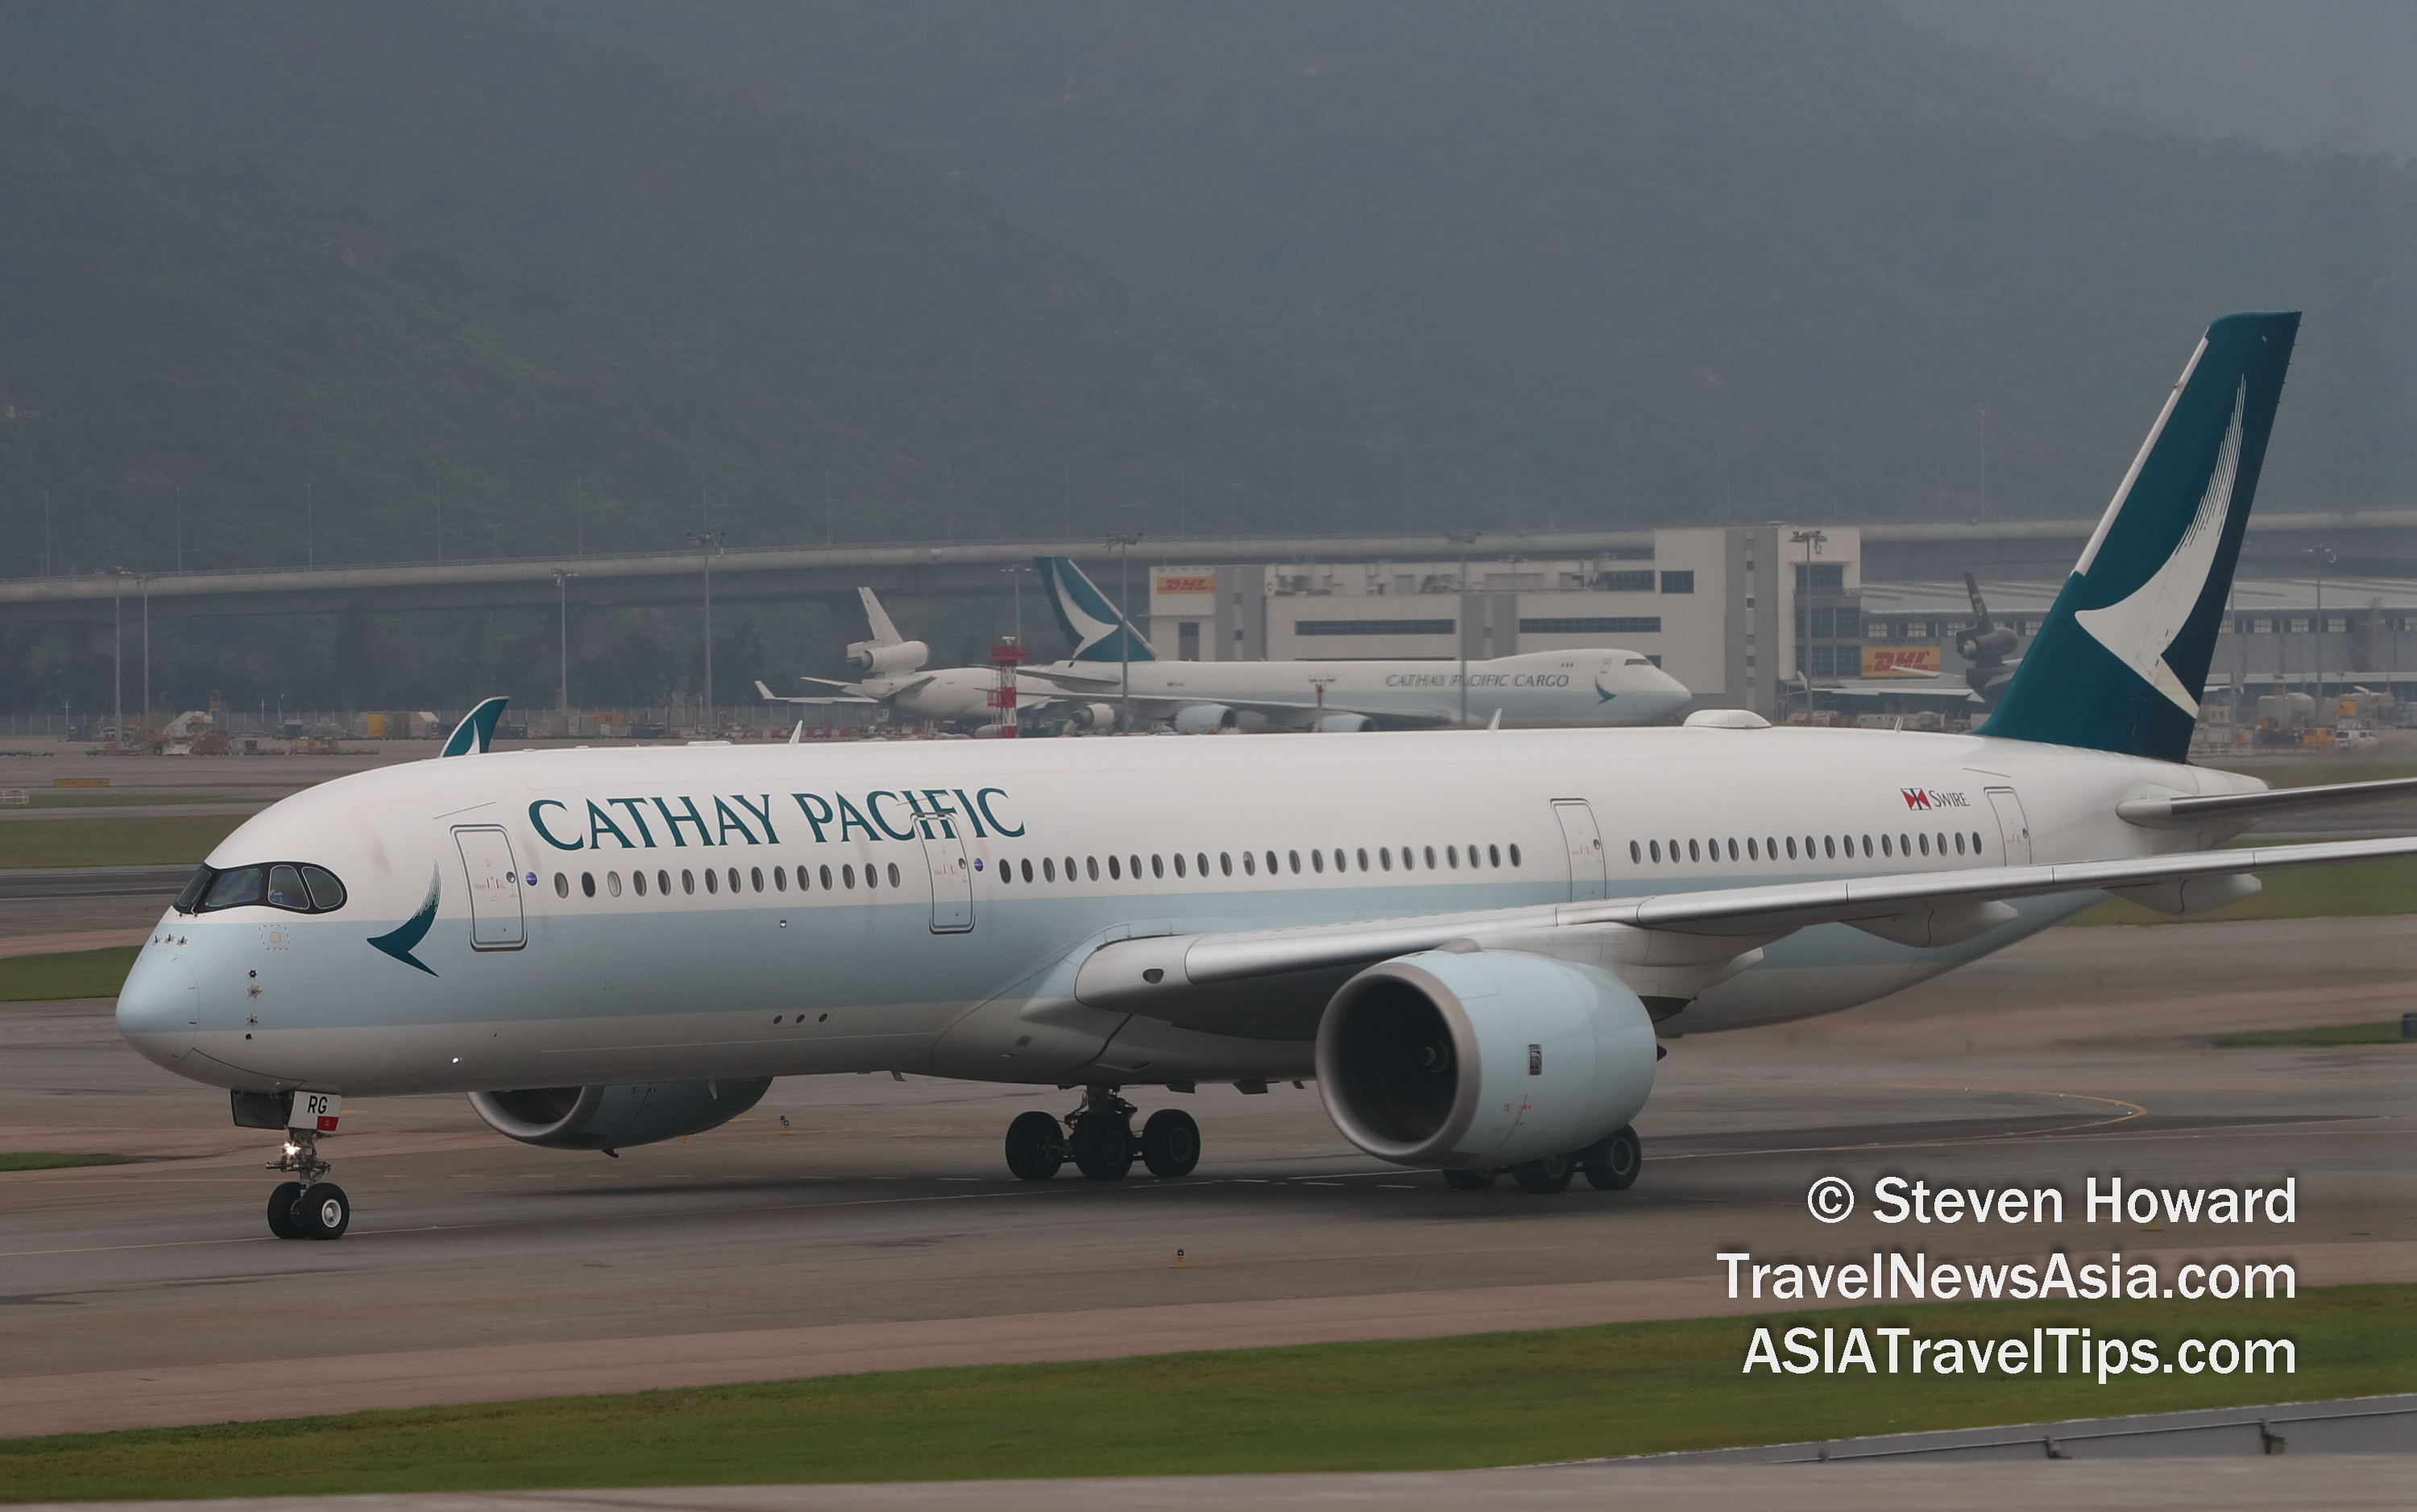 Cathay Pacific A350 in the foreground with a Cathay Pacific B747F in the background at HKIA. Picture by Steven Howard of TravelNewsAsia.com Click to enlarge.